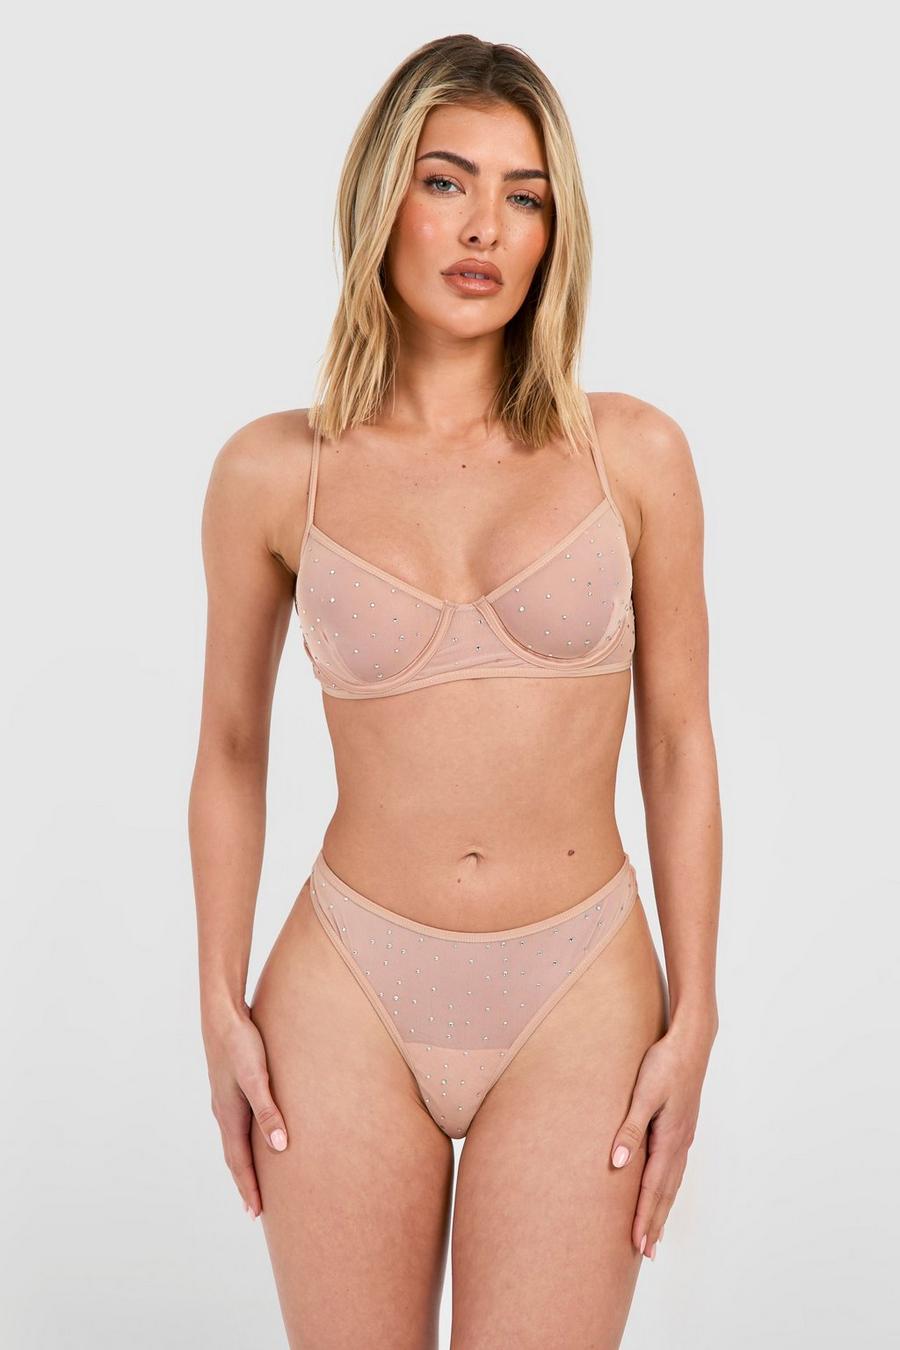 Boohoo is selling sexy lingerie just in time for Valentine's Day